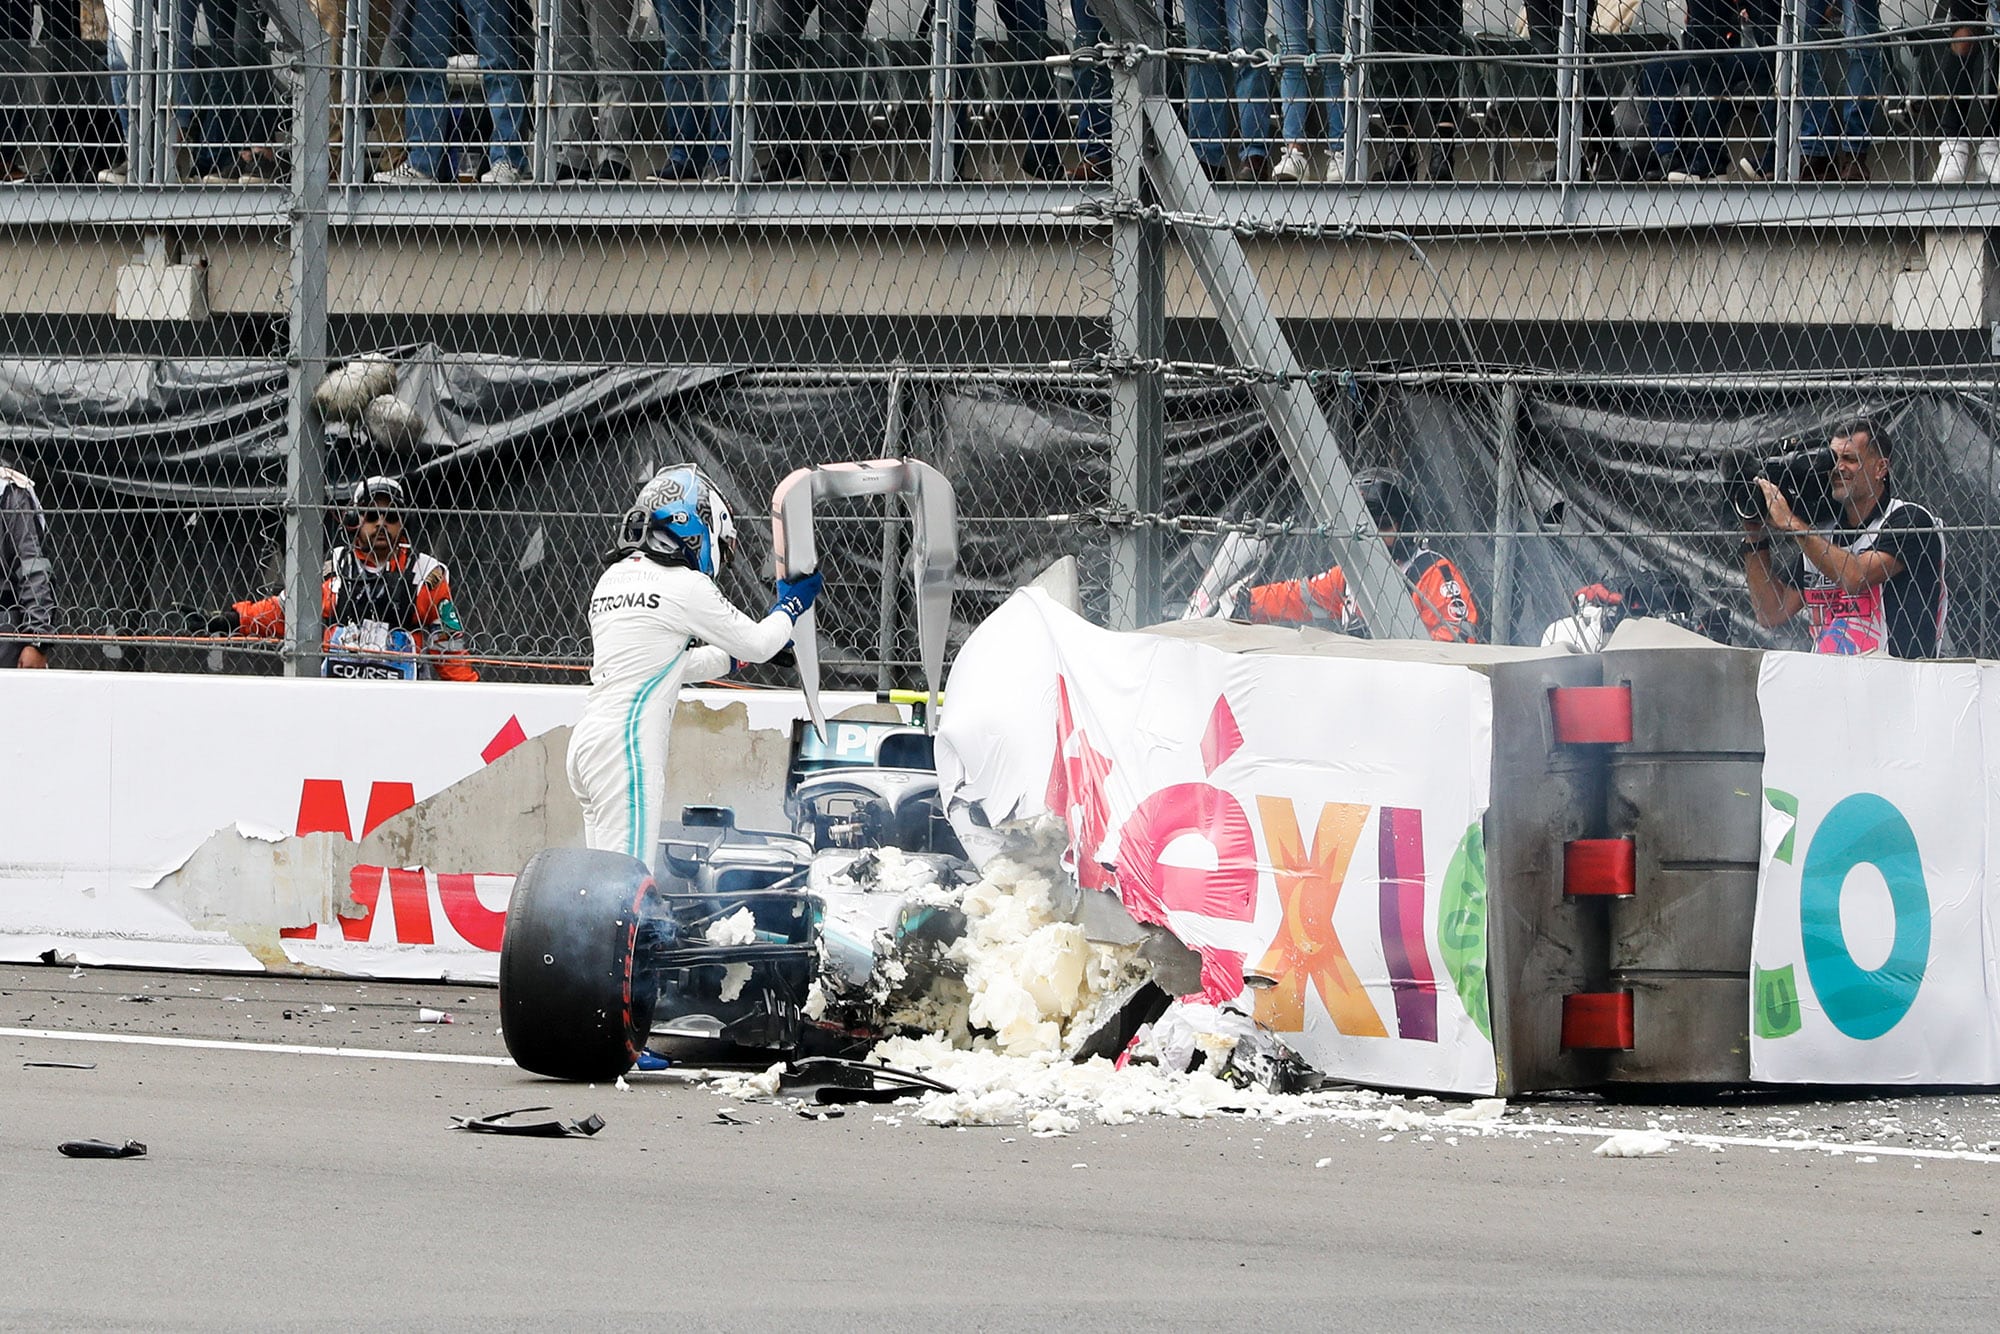 Valtteri Bottas's destroyed car in the barrier during qualifying for the 2019 F1 Mexican Grand Prix